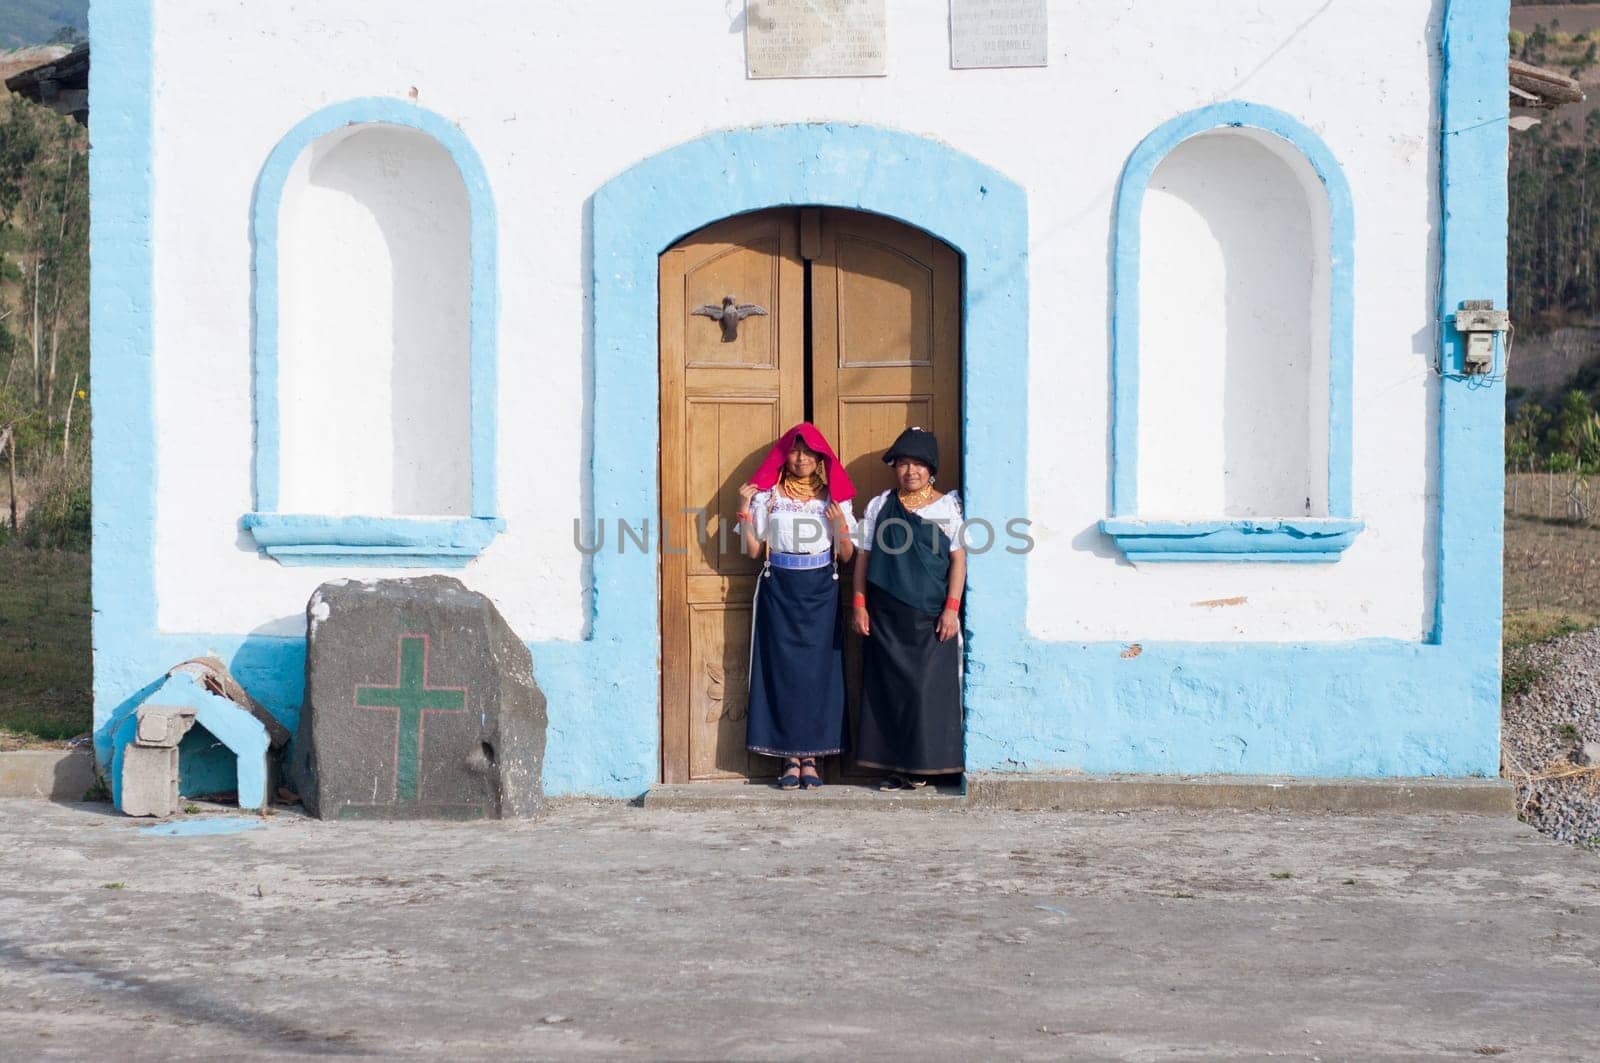 Mom and Daughter Leaving a Cute Little Church After Dia de los Muertos Prayers by Raulmartin